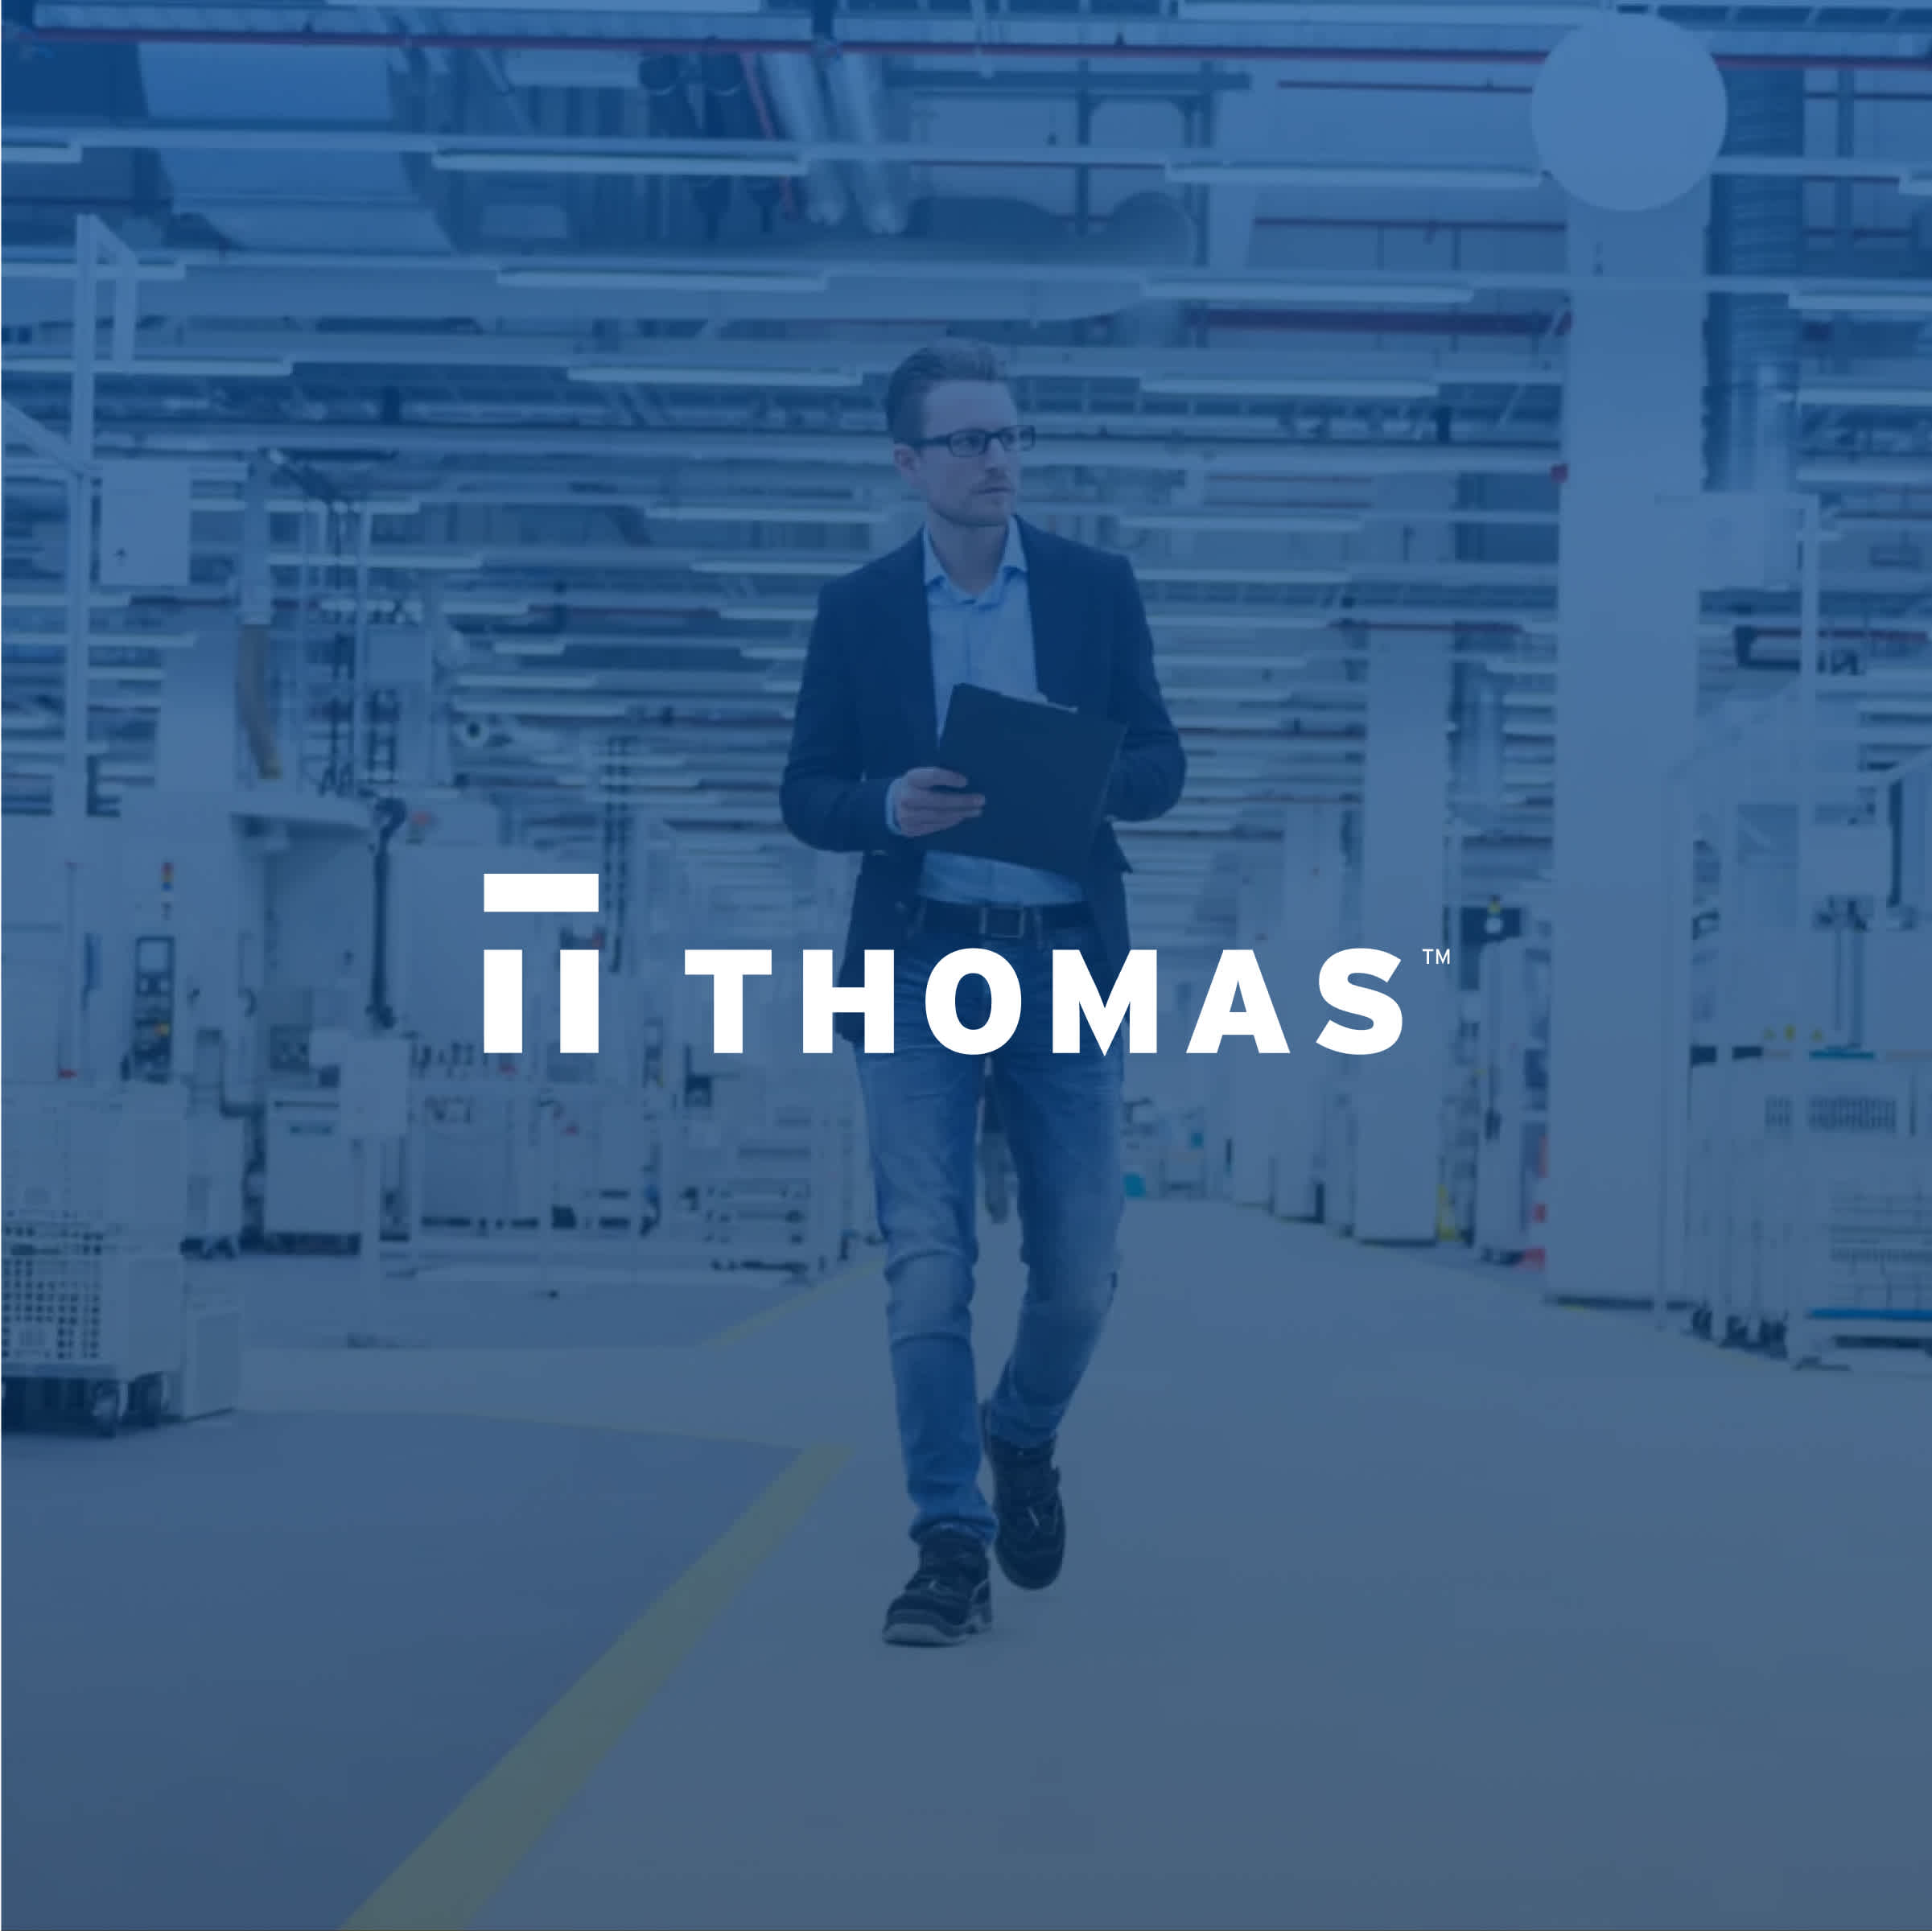 Thomas makes moves mid-crisis to connect critical industrial suppliers to buyers using FullStory + Optimizely